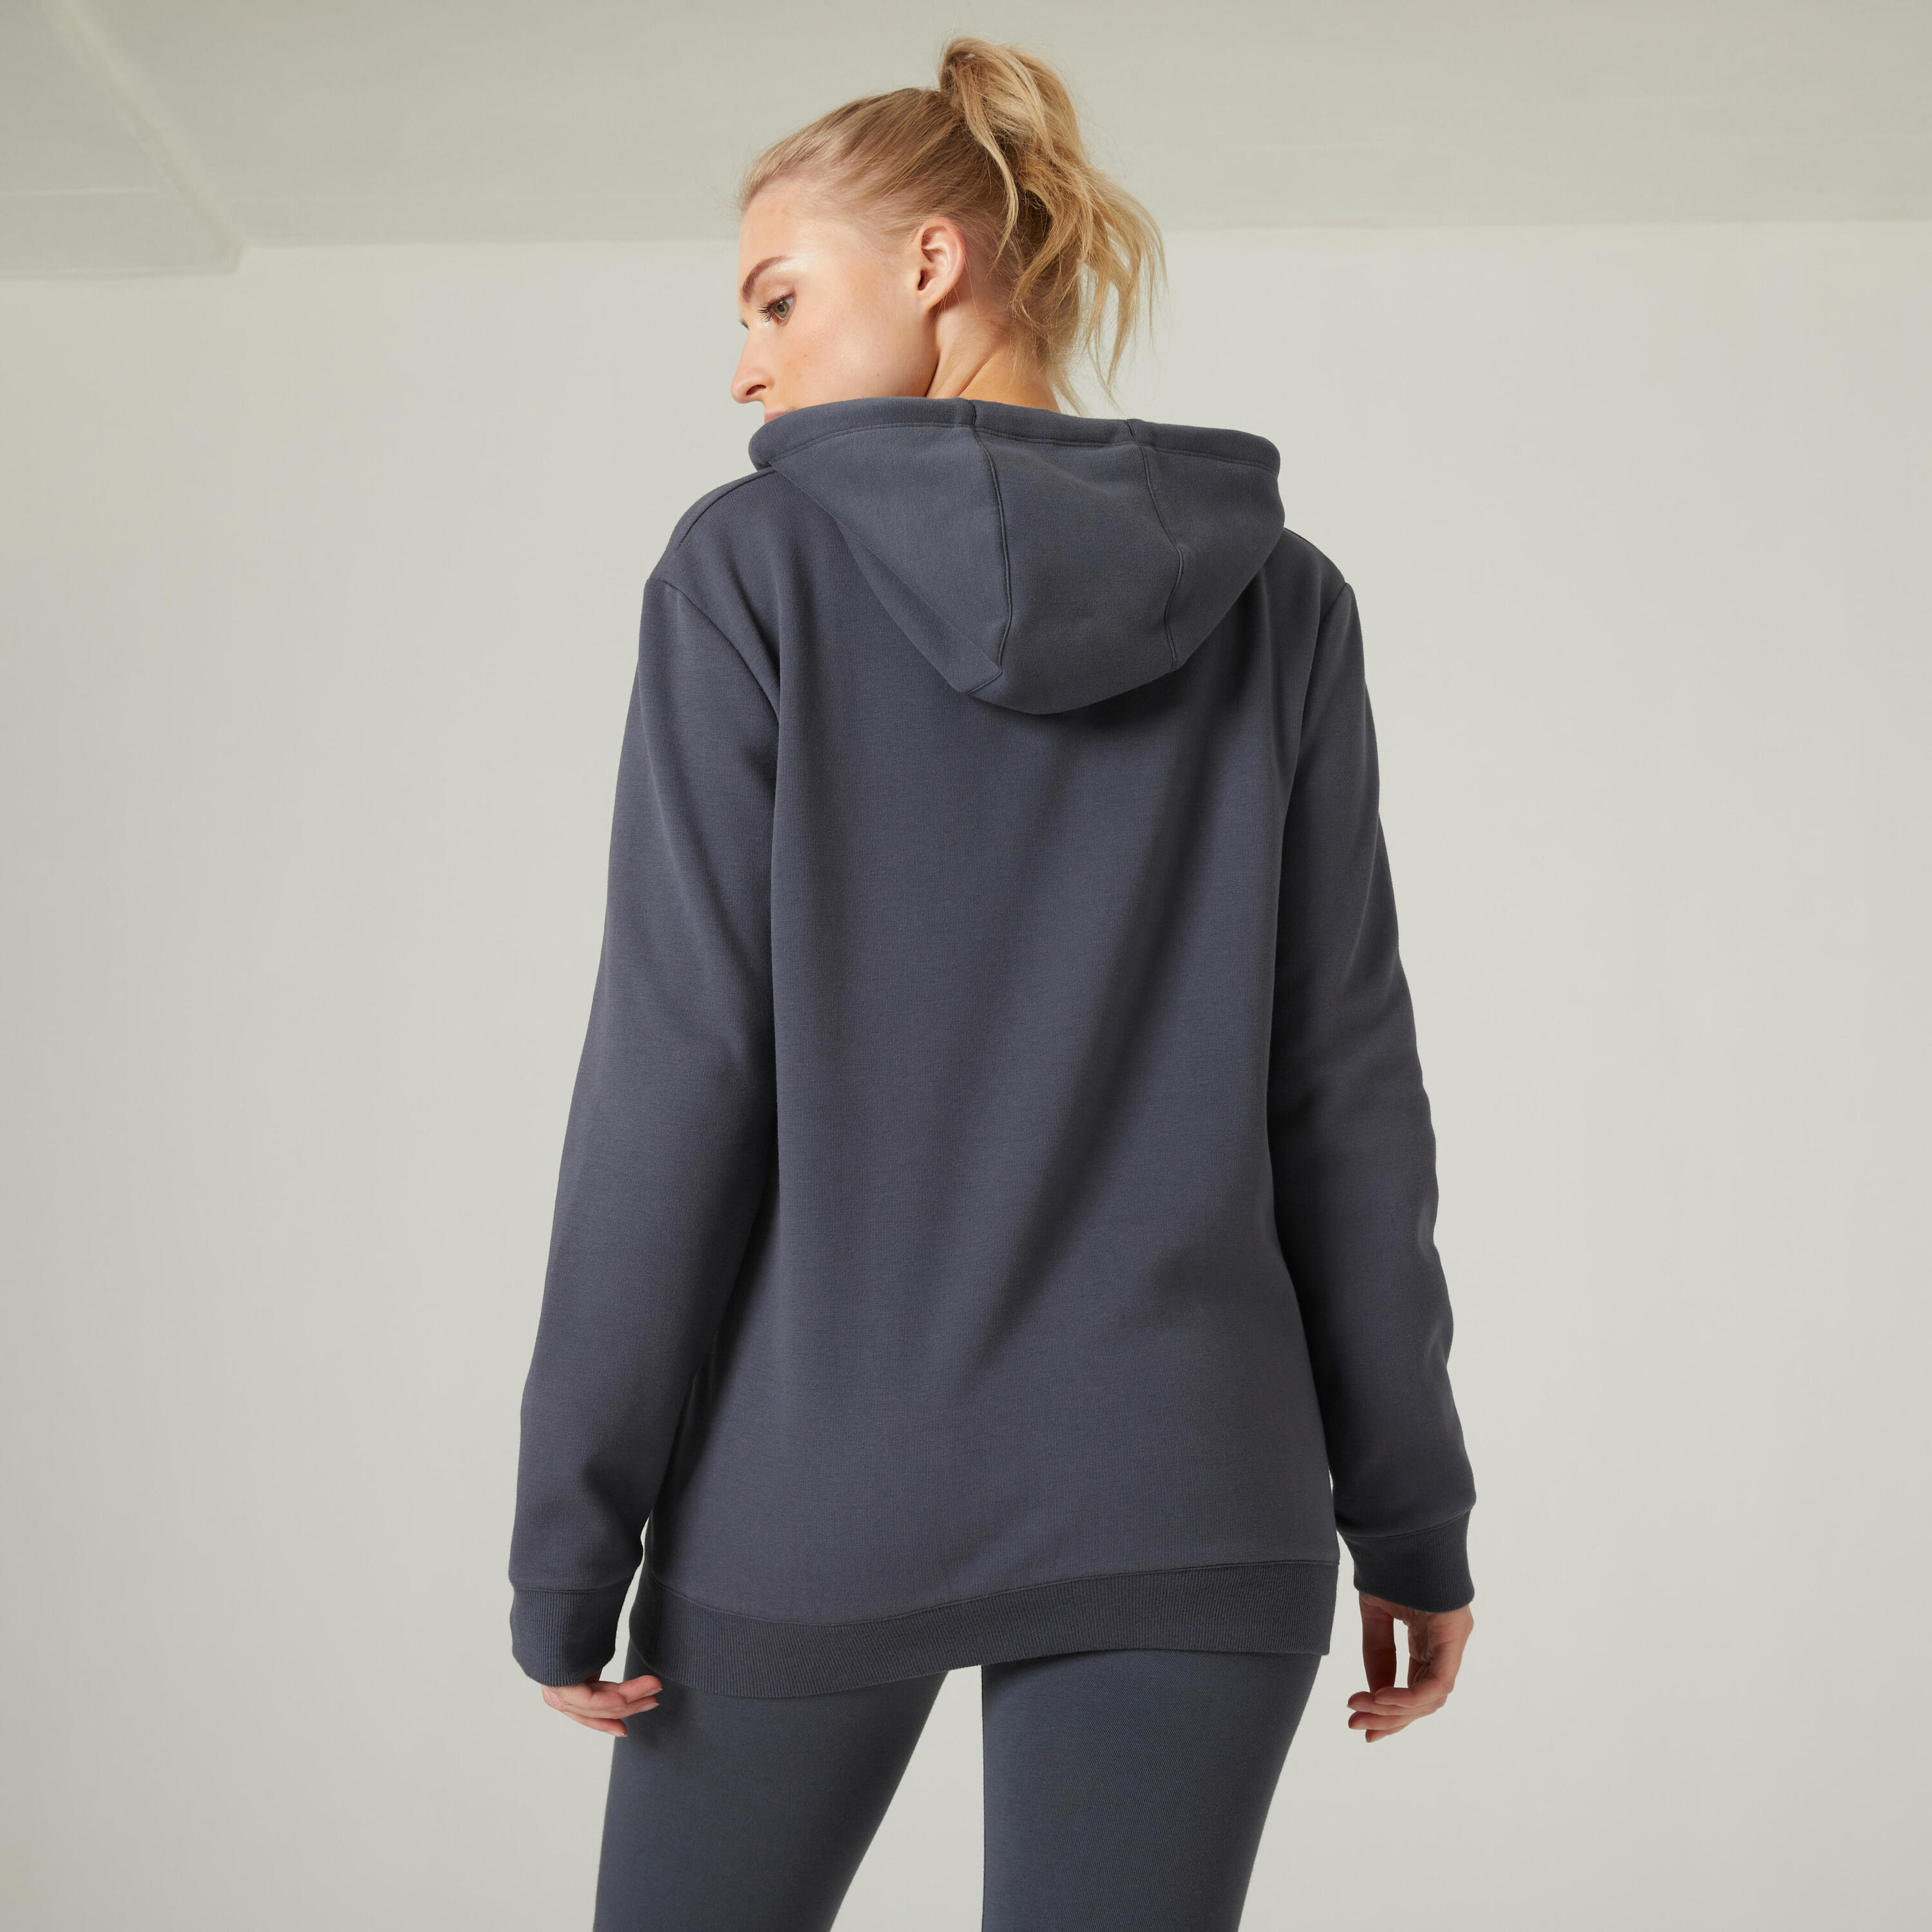 Women's Fitness Hoodie 520 - Abyss Grey 2/6